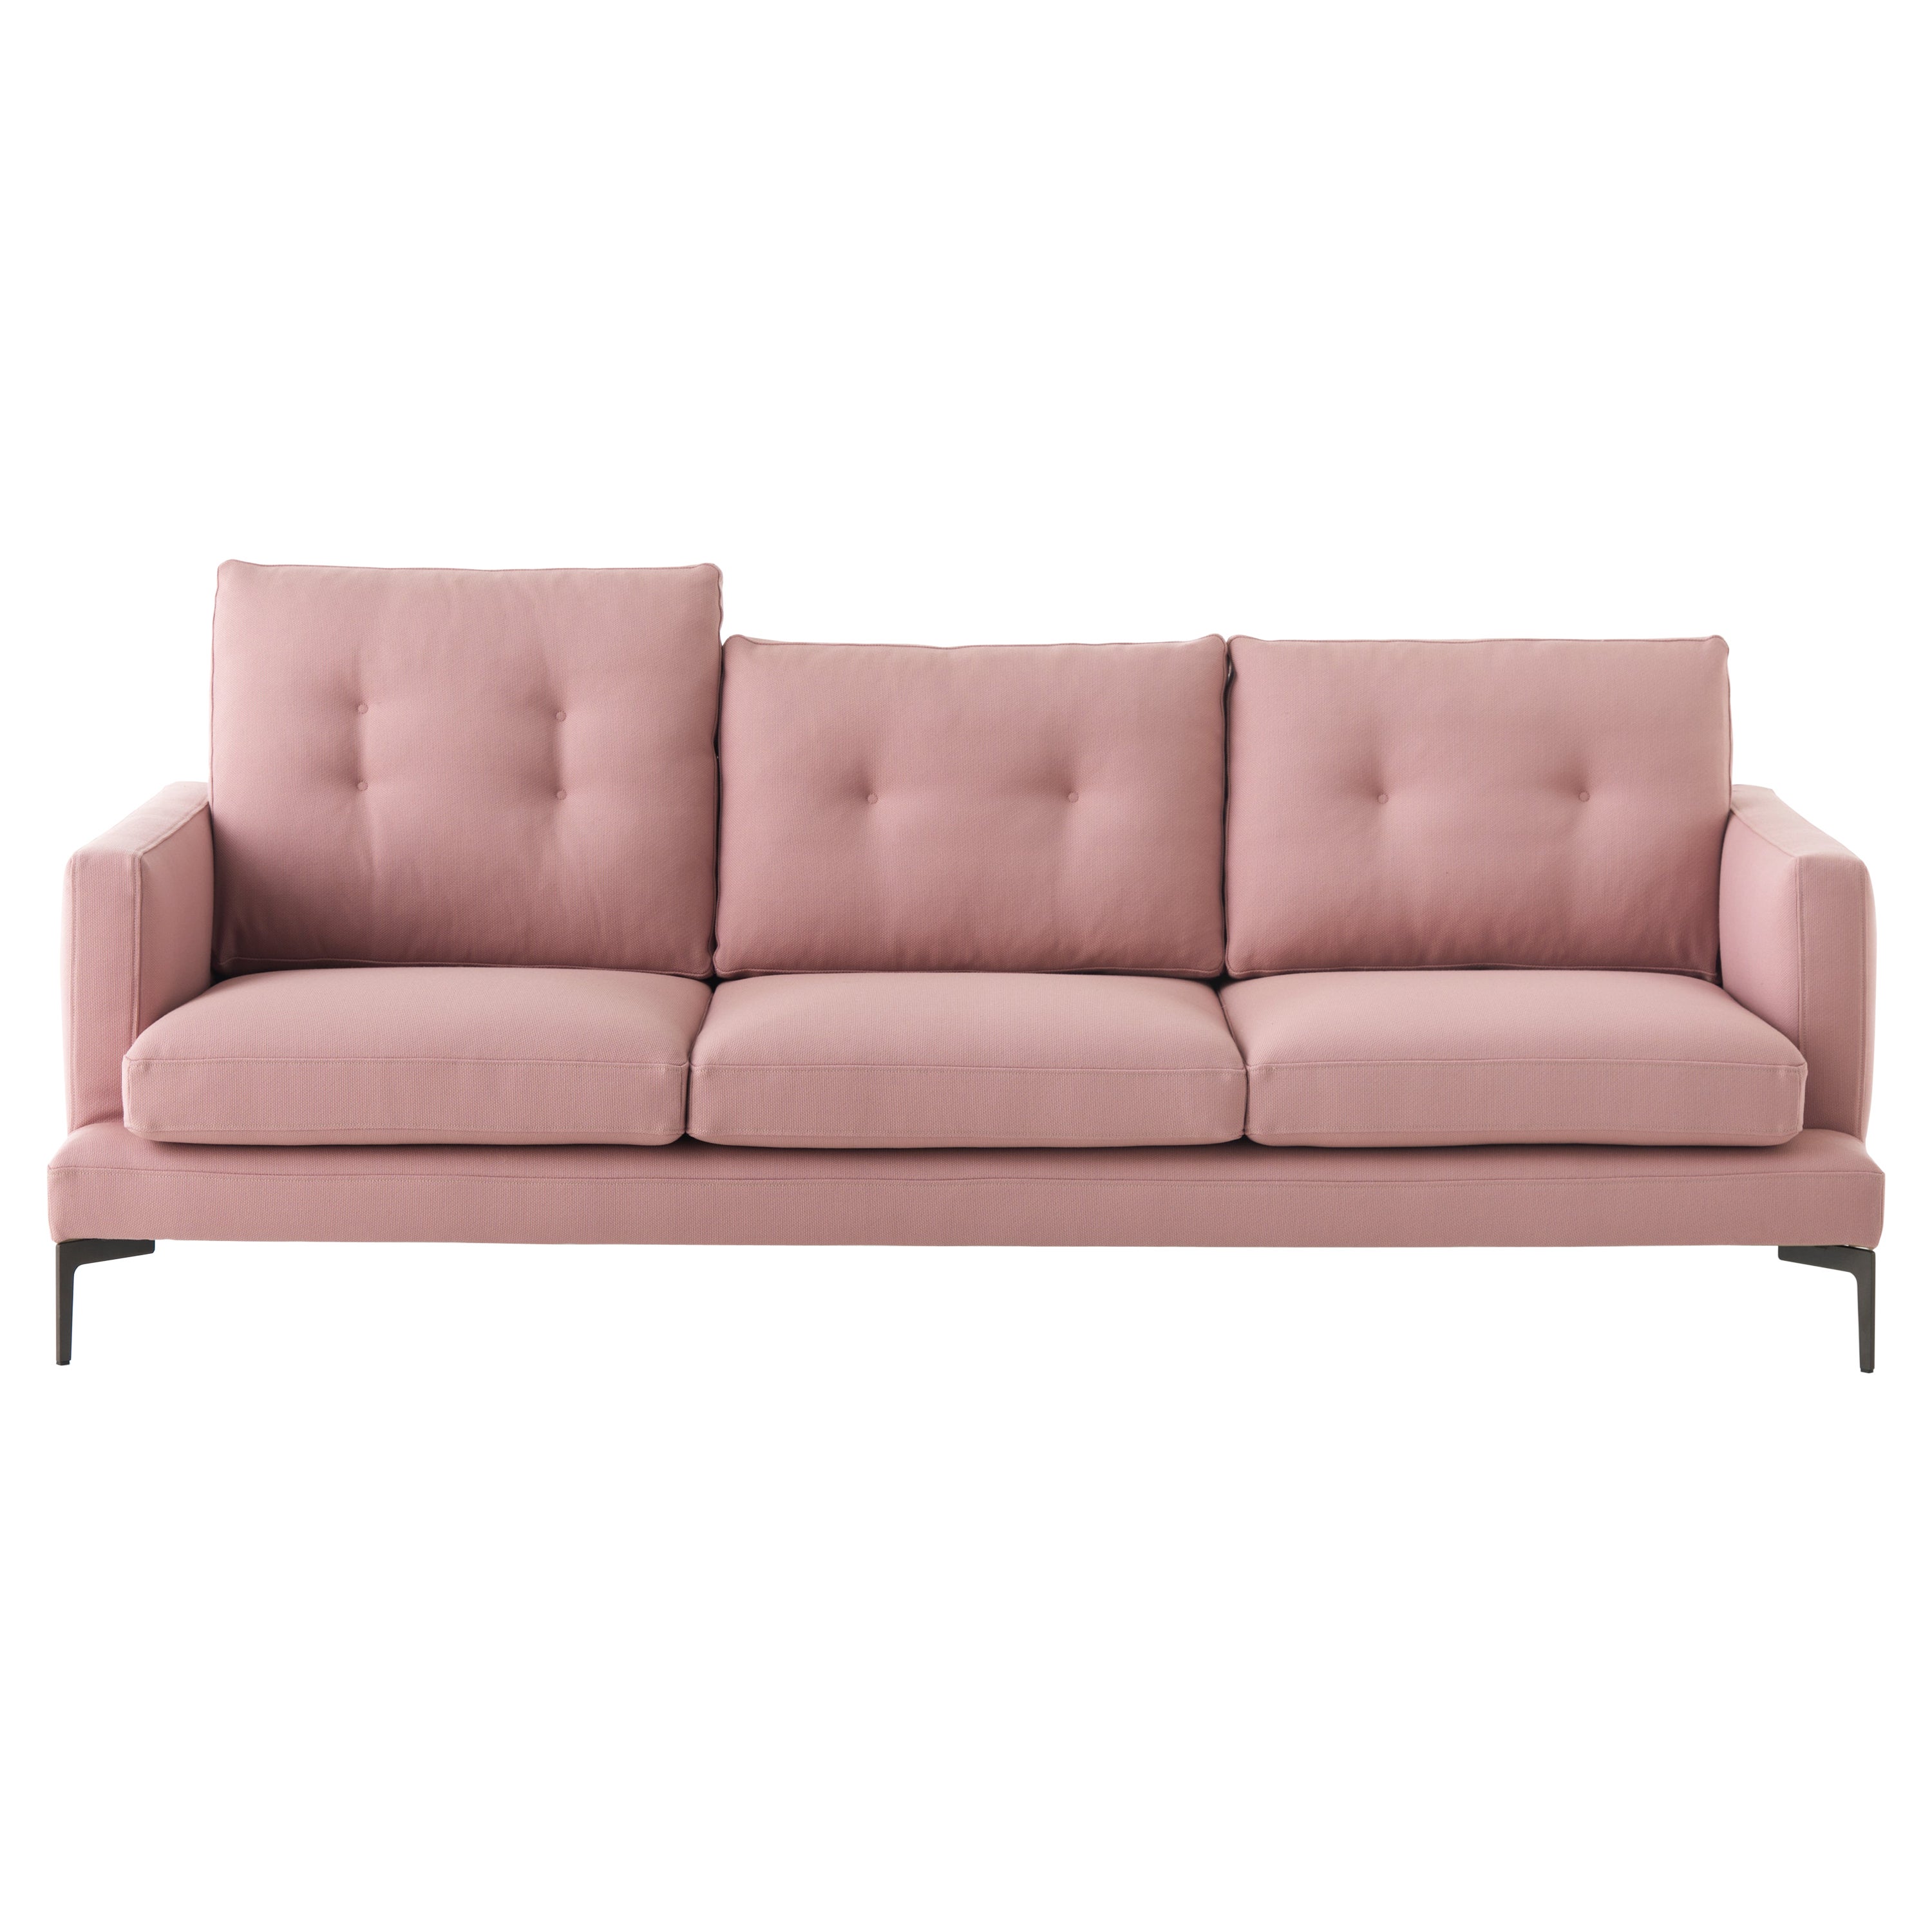 Essentiel 3-Seat 220 High Cushion Sofa in Smile Pink Upholstery by Sergio Bicego For Sale